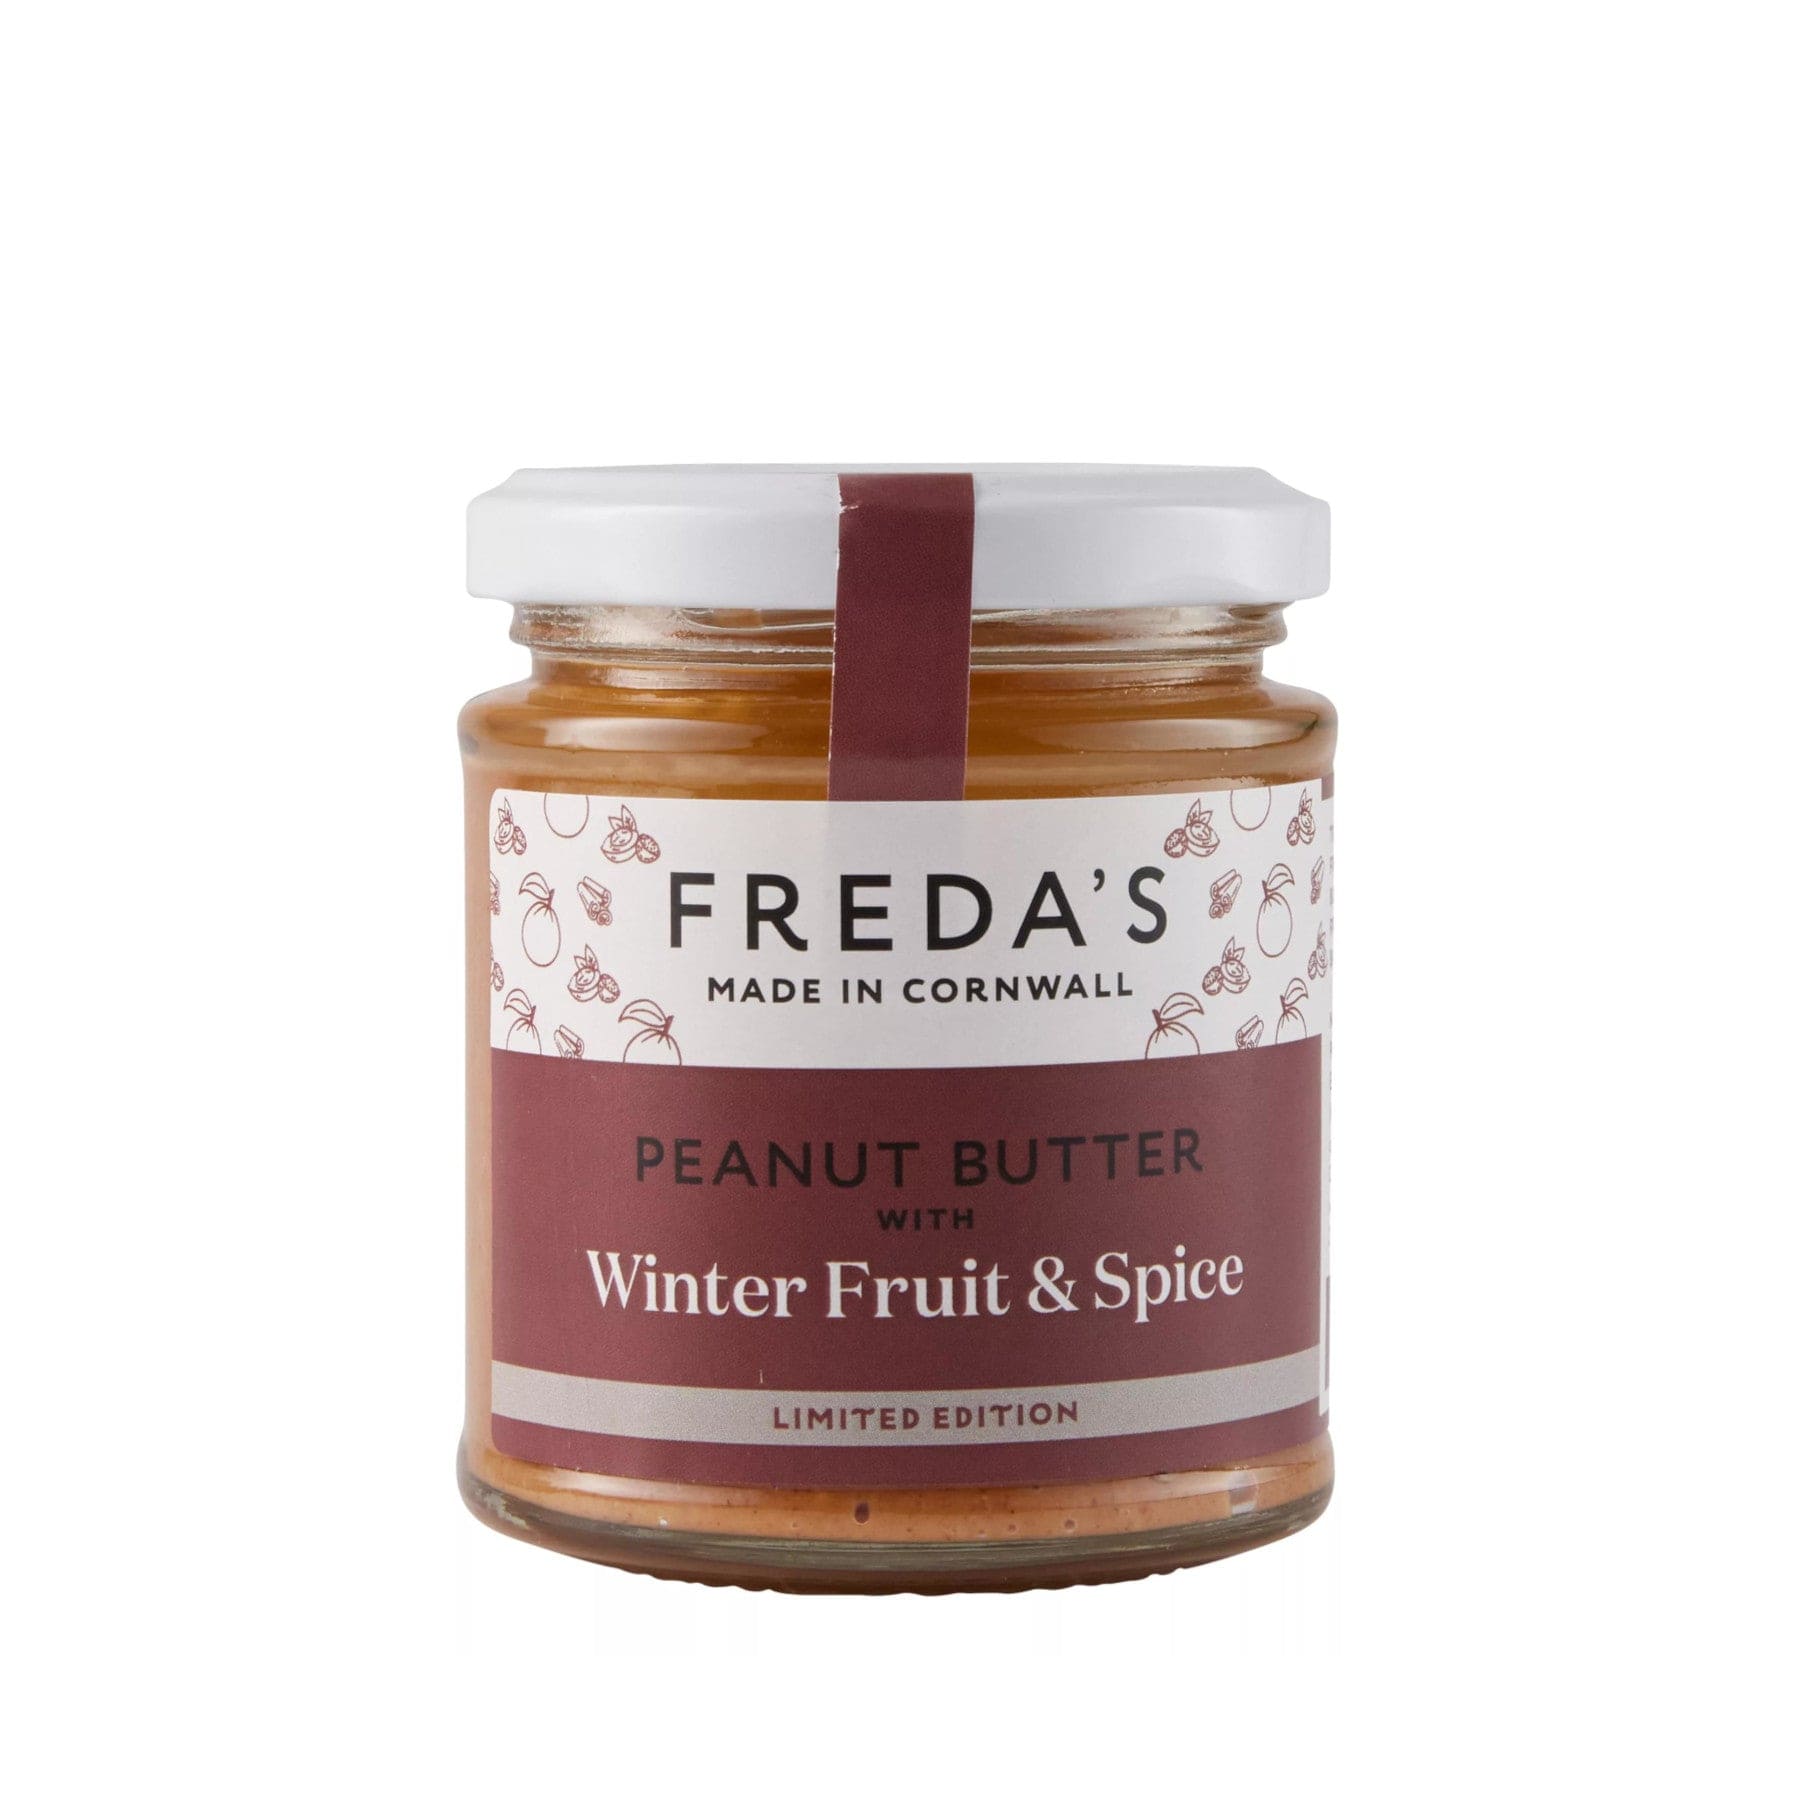 Jar of Freda's limited edition peanut butter with winter fruit and spice, made in Cornwall, with white cap and maroon label on a white background.